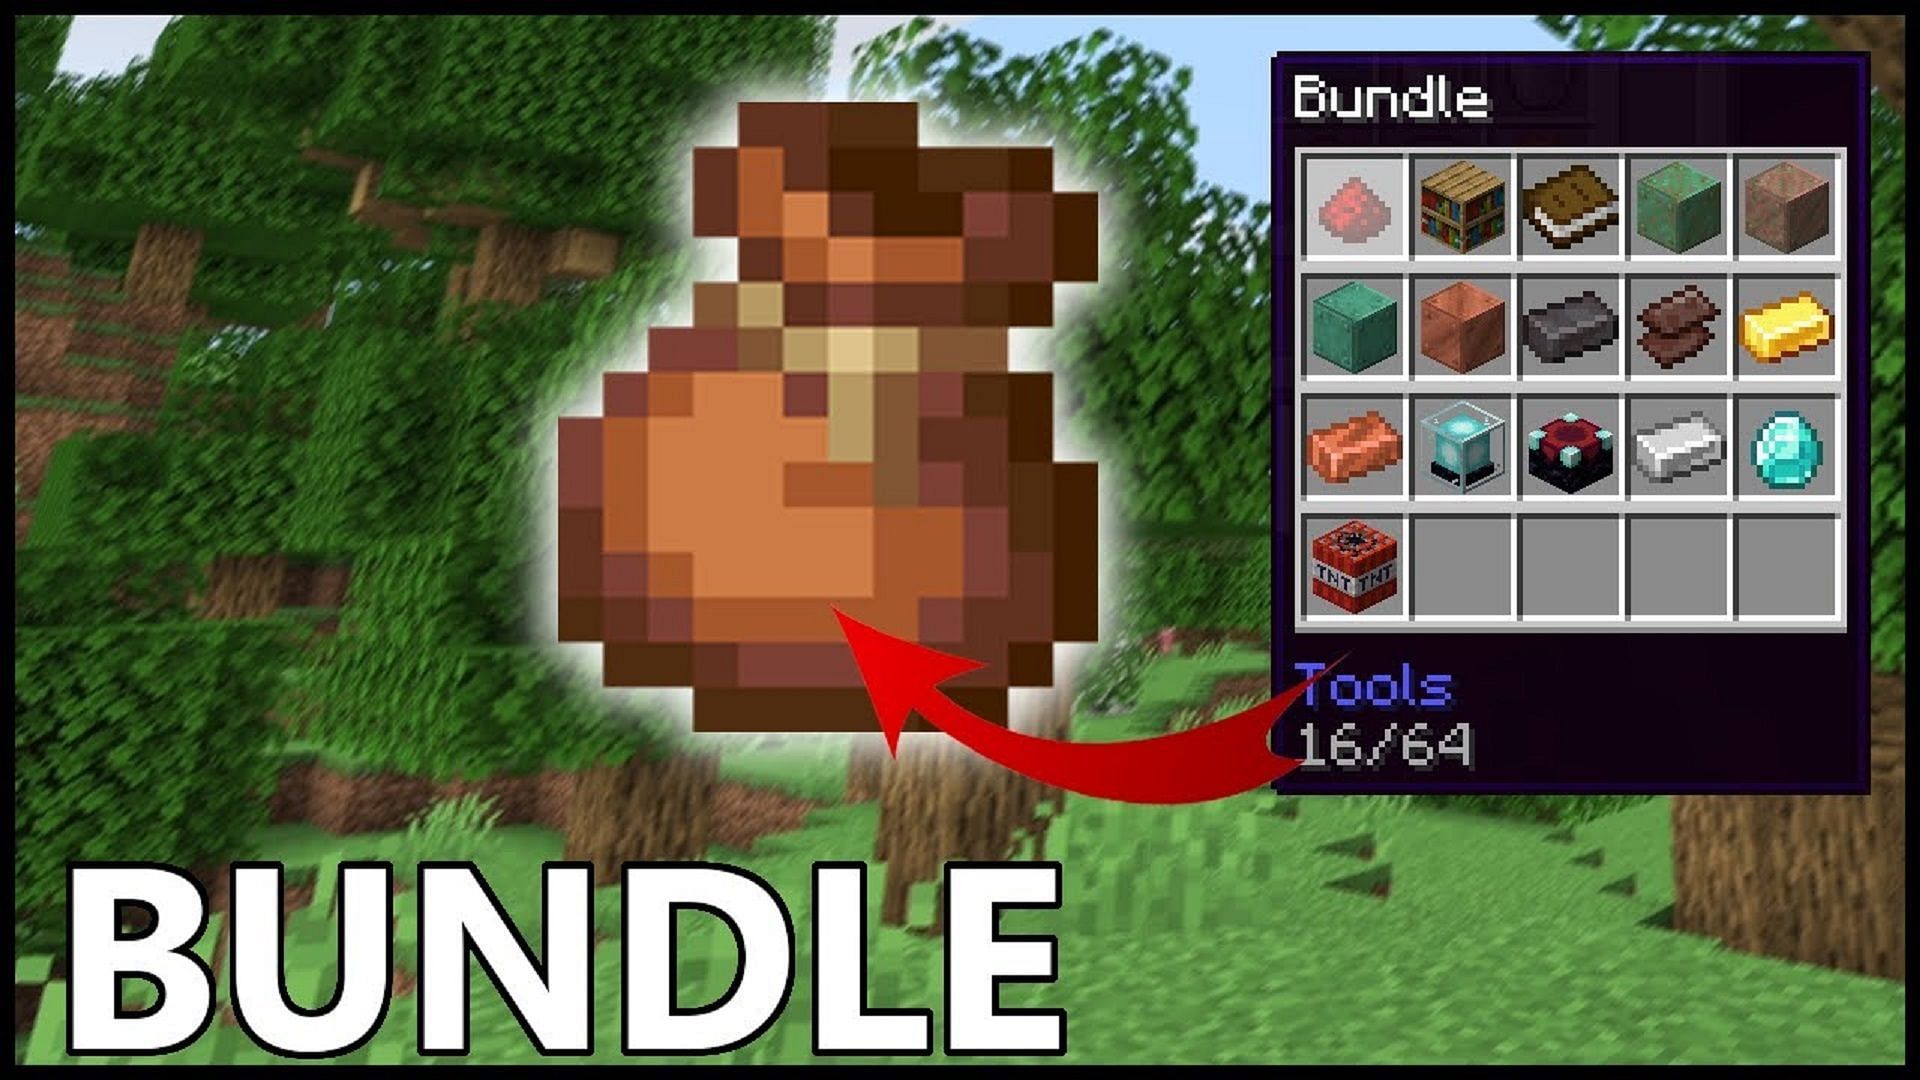 Bundles have returned to Minecraft thanks to update 1.19.3, but there's a catch (Image via Rajcraft/YouTube)